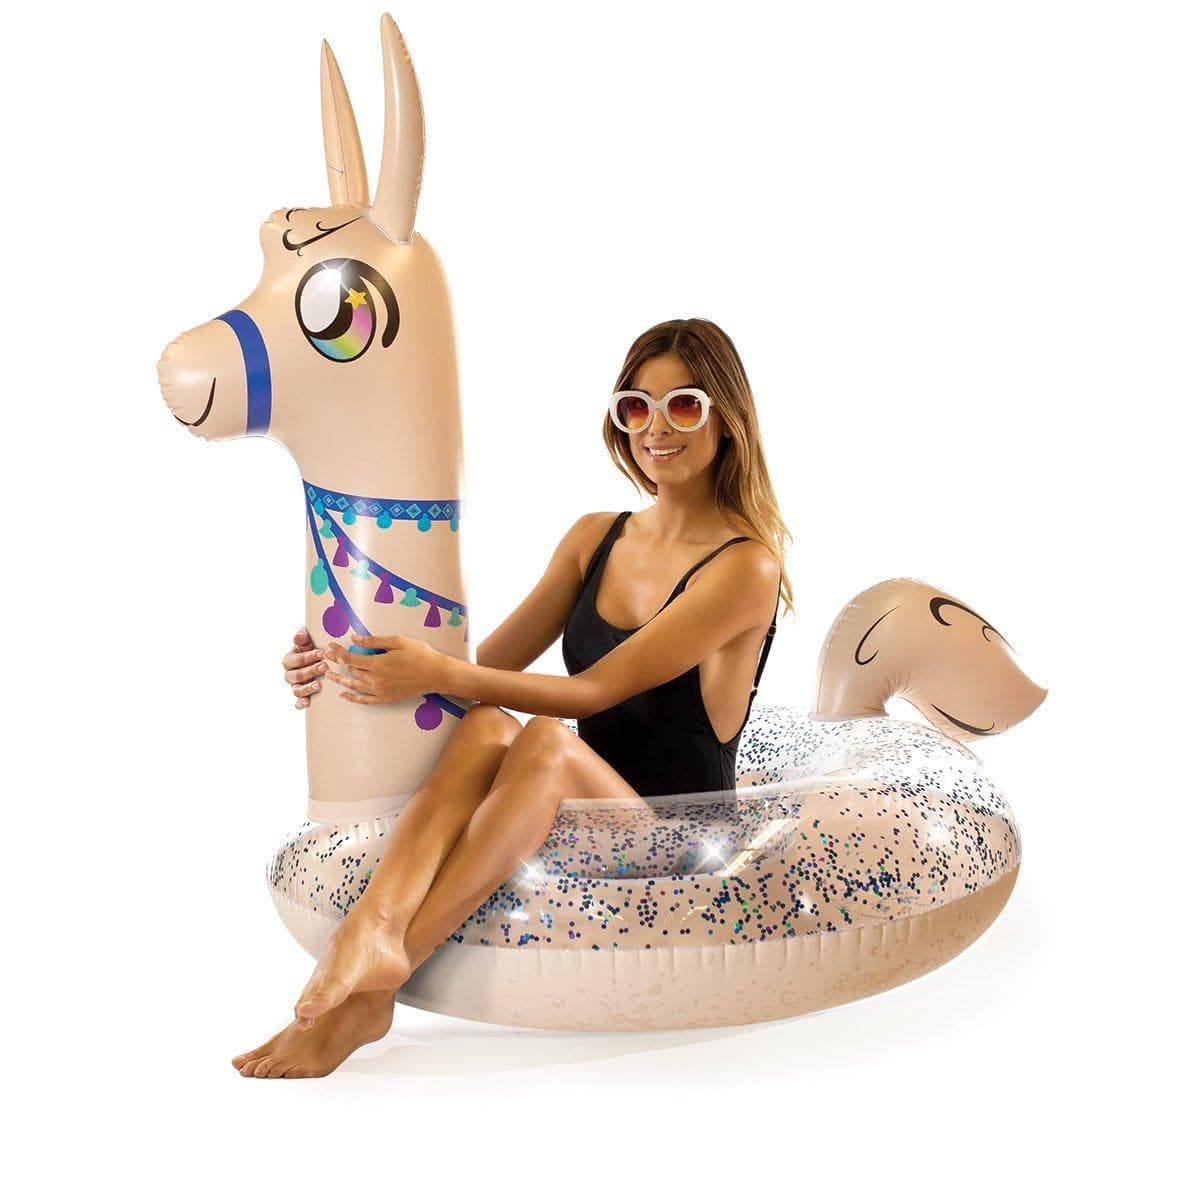 Buy Summer Llama glitter tube pool float, 48 inches sold at Party Expert